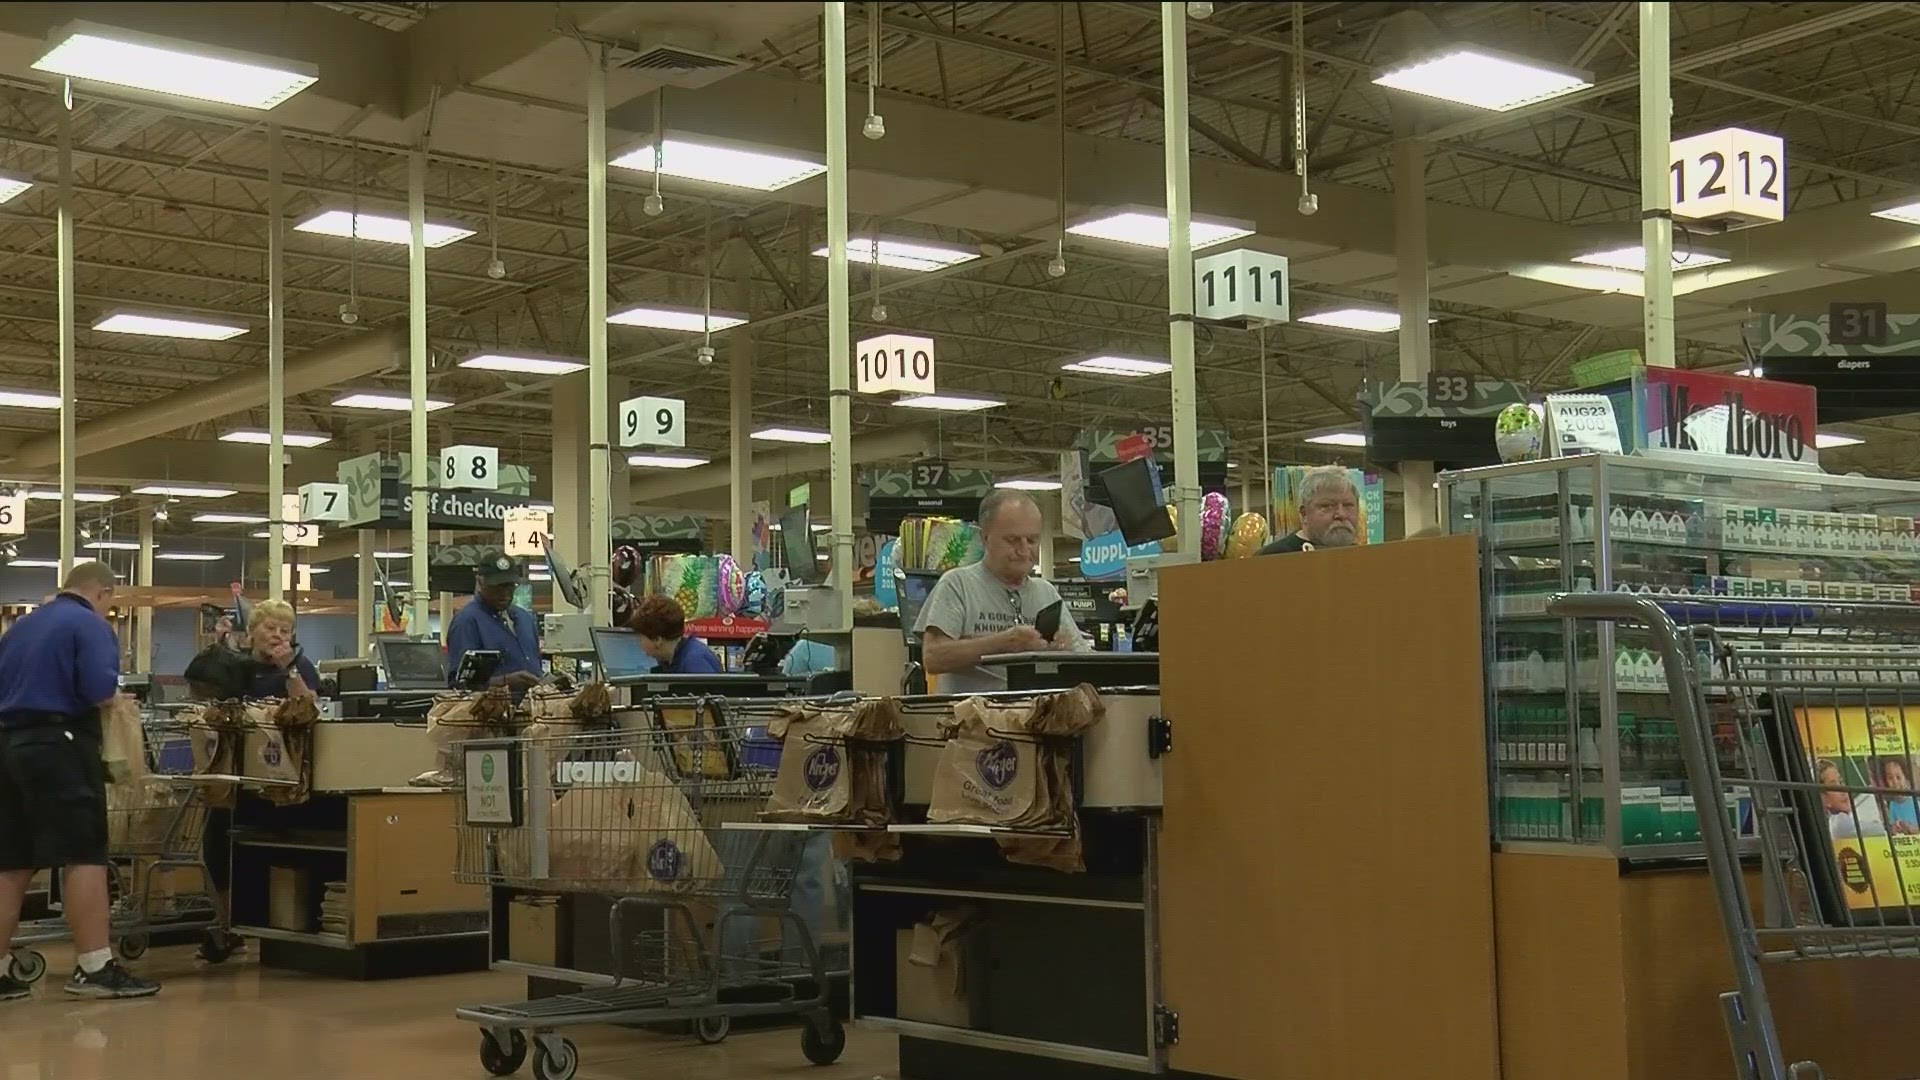 Kroger announced senior citizens will get 5 percent off purchases Wednesday. The grocery chain said it wants to help senior citizens get through the holidays.